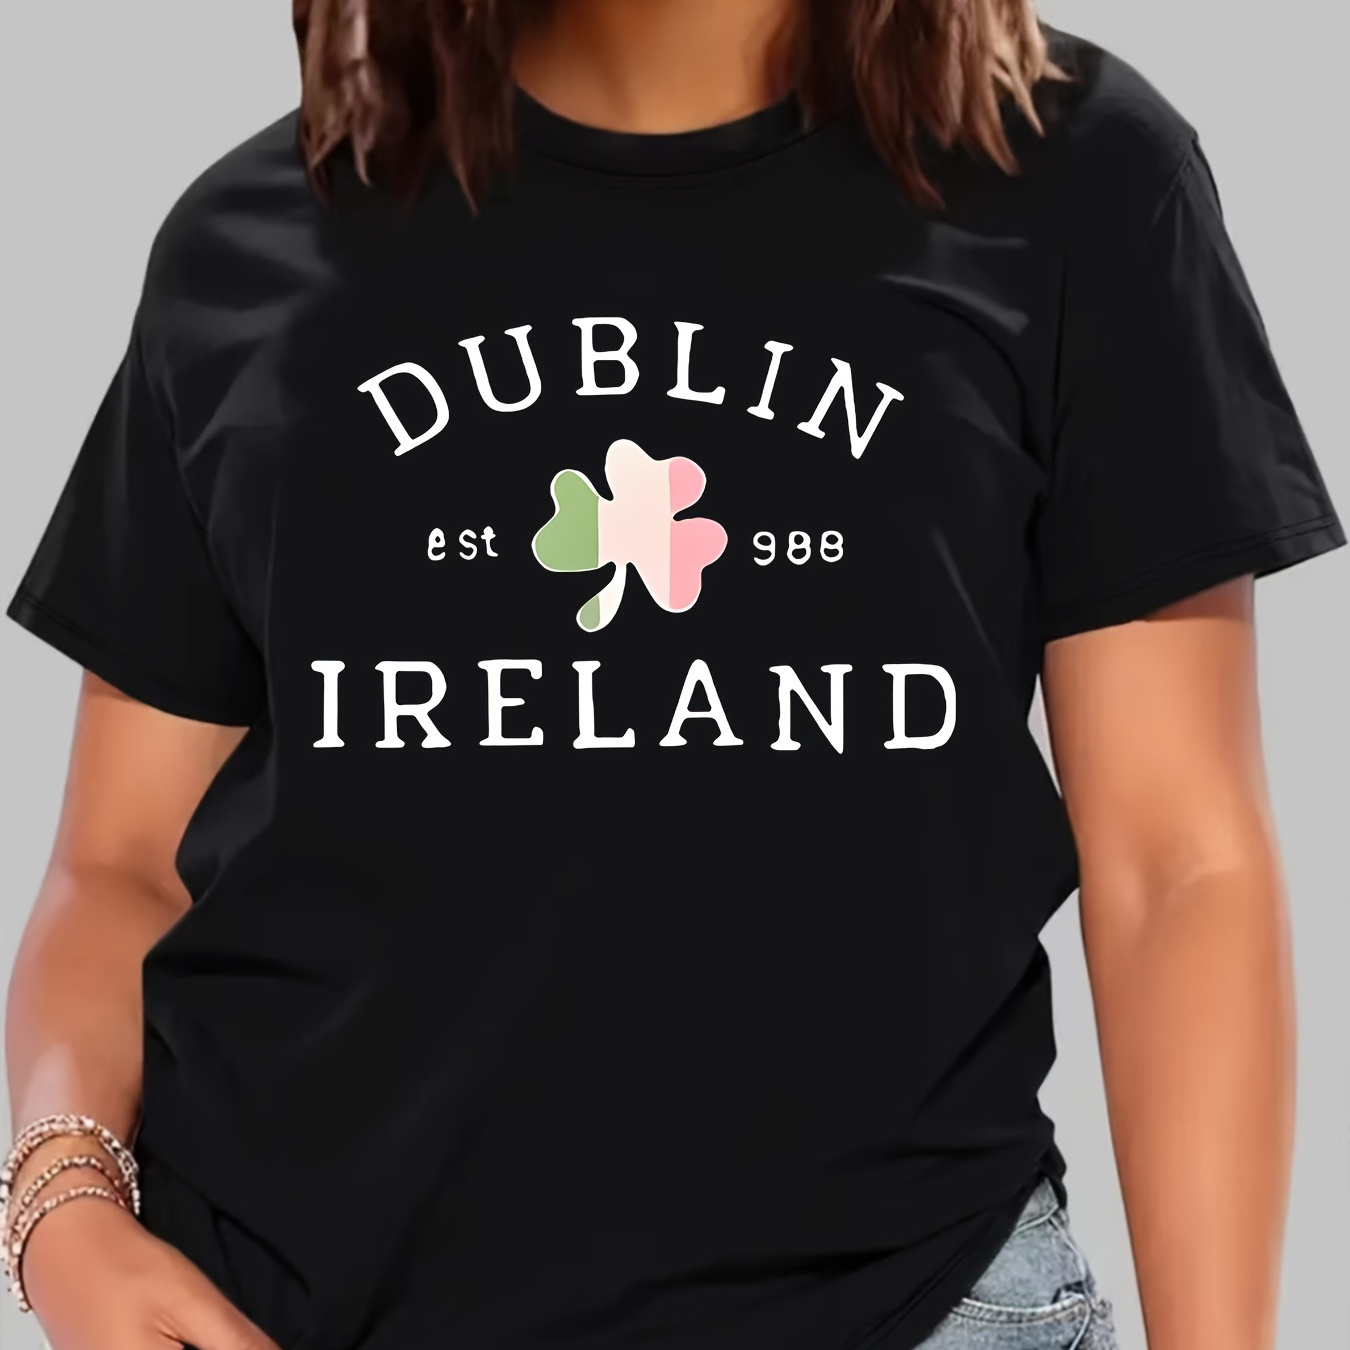 

Women's St. Patrick's Day Sports T-shirt Top, Plus Size Colorful Clover & Letter Print Stretchy Round Neck Breathable Short Sleeve Fitness Tee Top